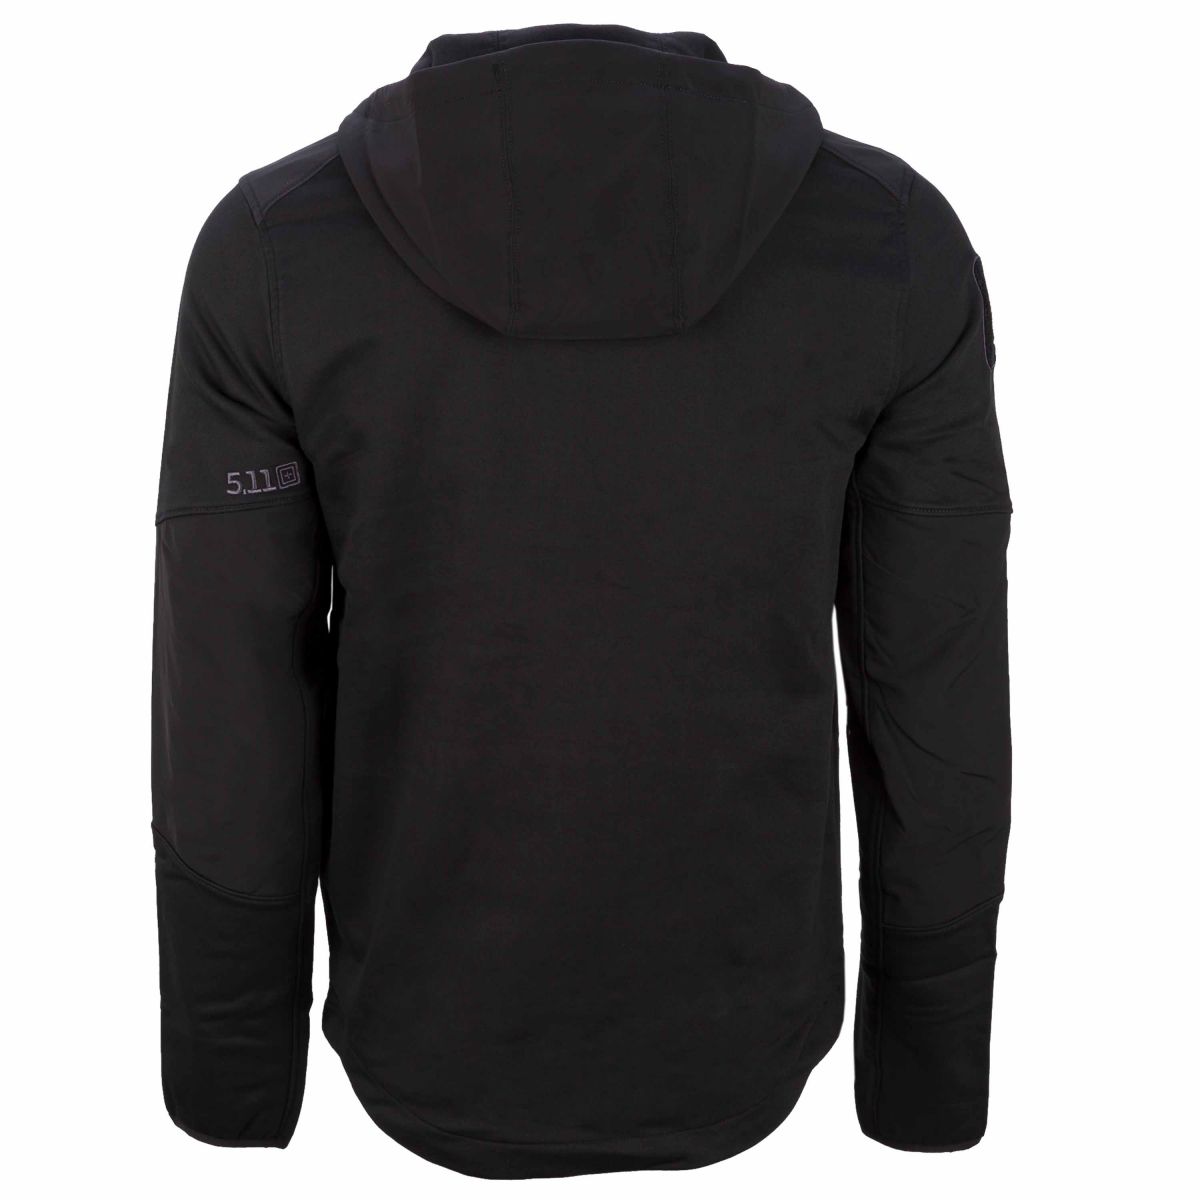 Purchase the 5.11 Rappel Jacket black by ASMC